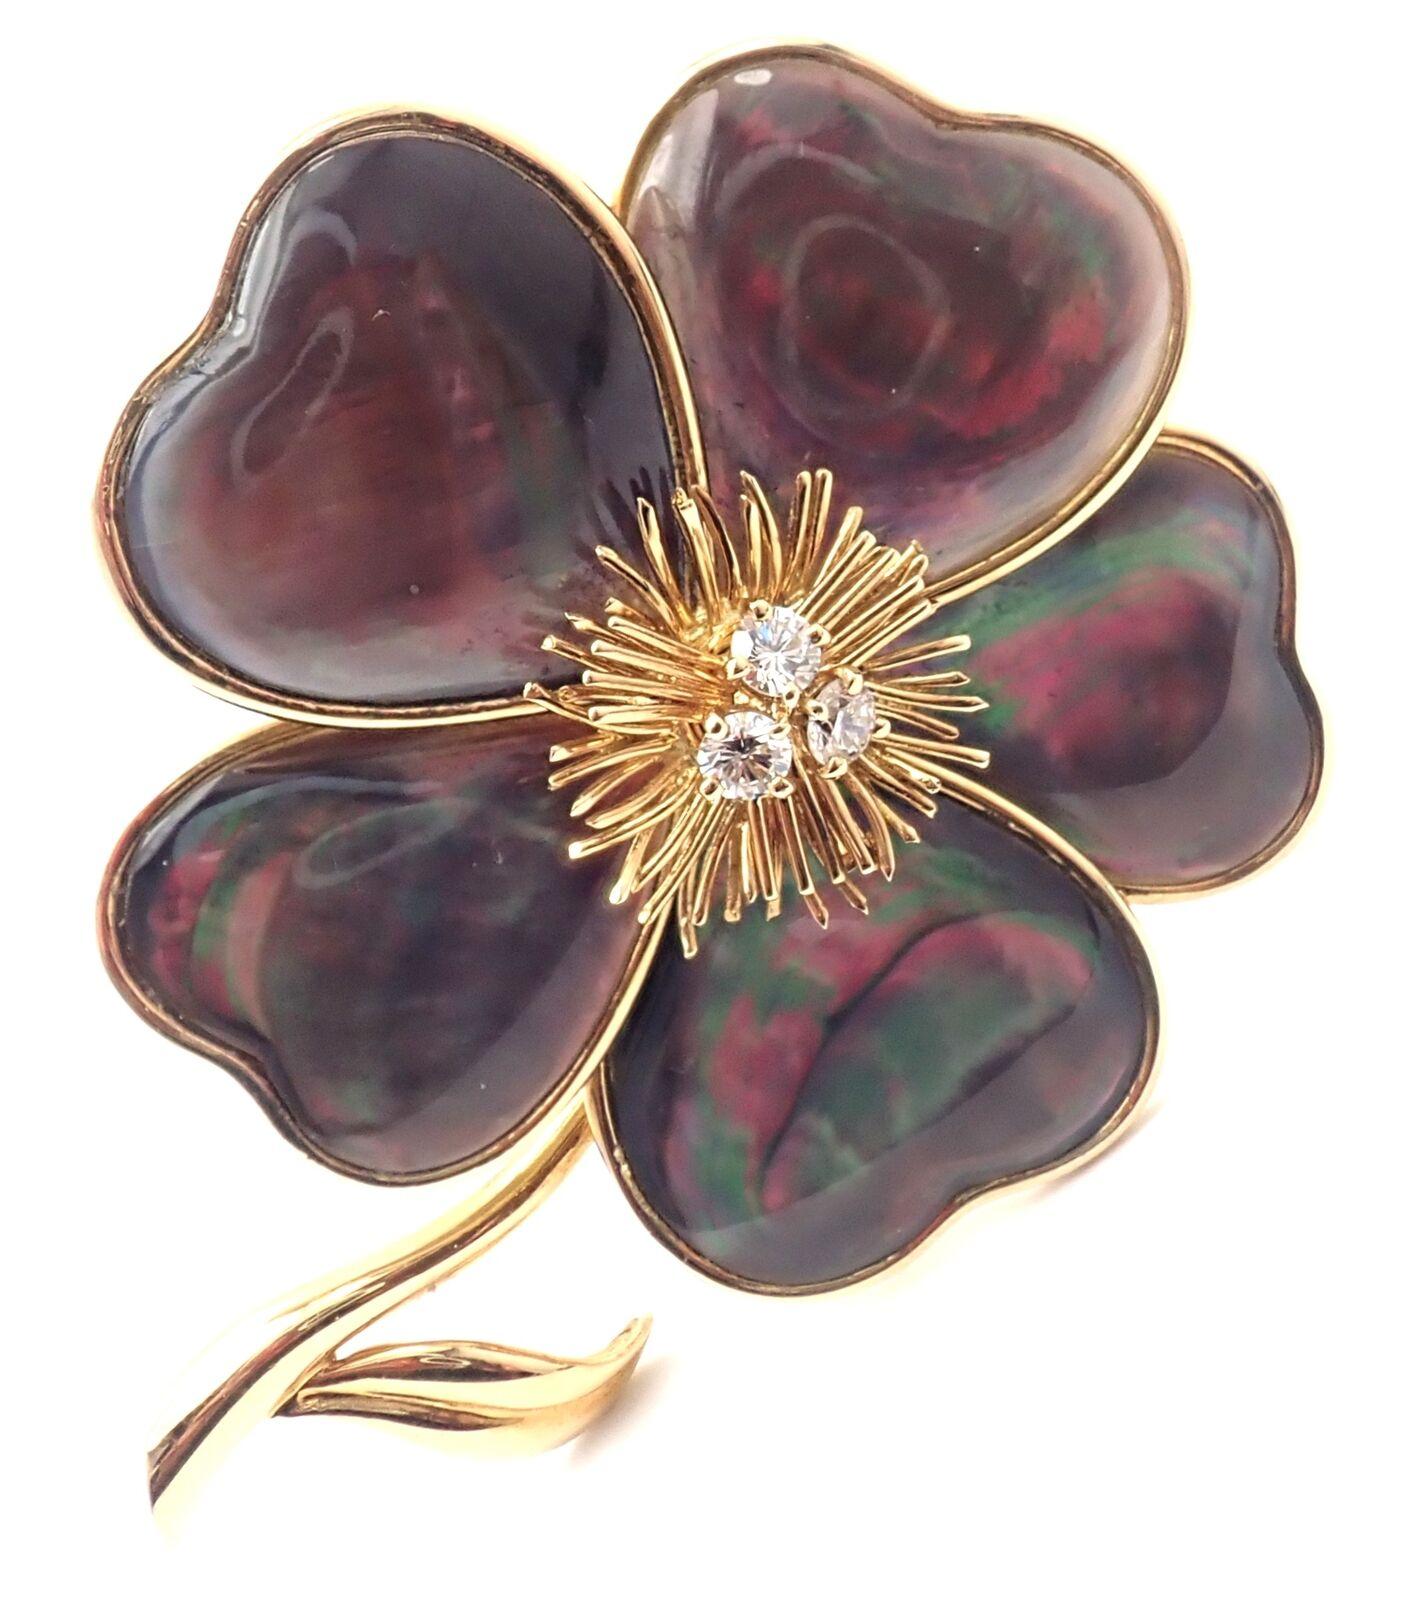 18k Yellow Gold Clématite Flower Diamond Gray Mother Of Pearl Brooch by Van Cleef & Arpels.
This brooch comes with service paper from VCA store in New York and a VCA box.
With 3 round brilliant cut diamonds VVS1 clarity, E color total weight approx.